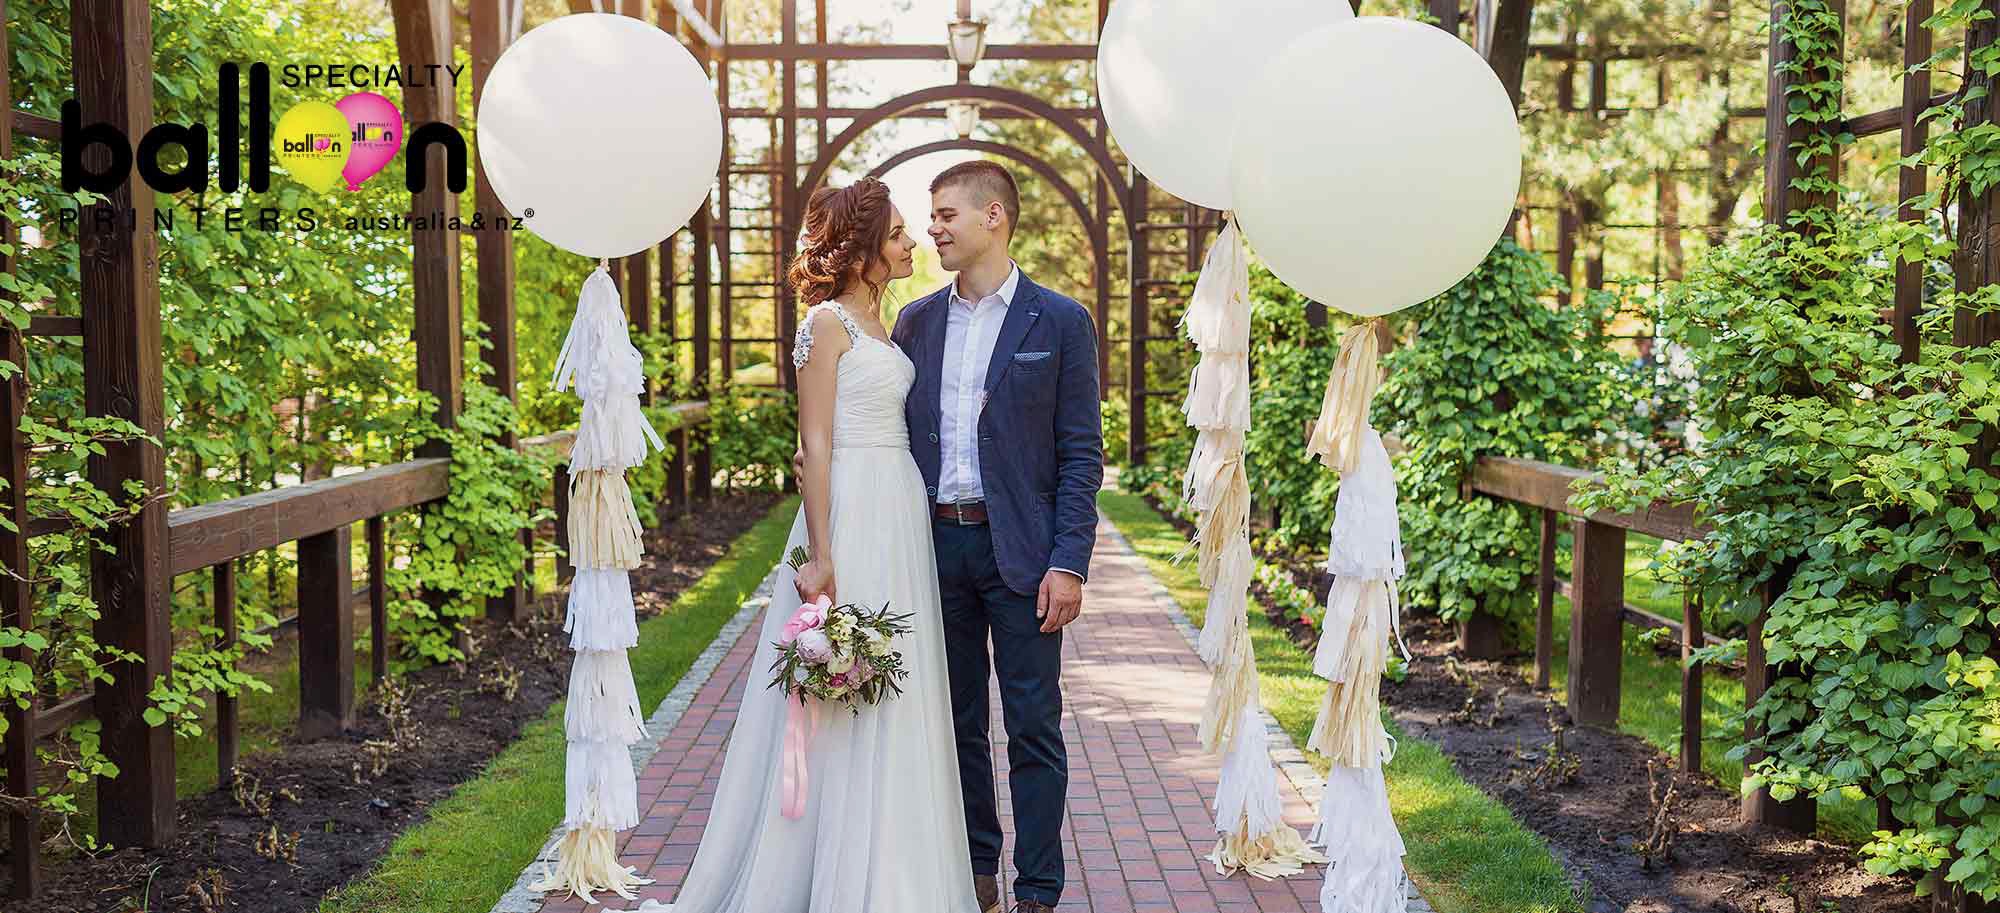 Specialty Balloon Printers How To Choose The Perfect Wedding Decor